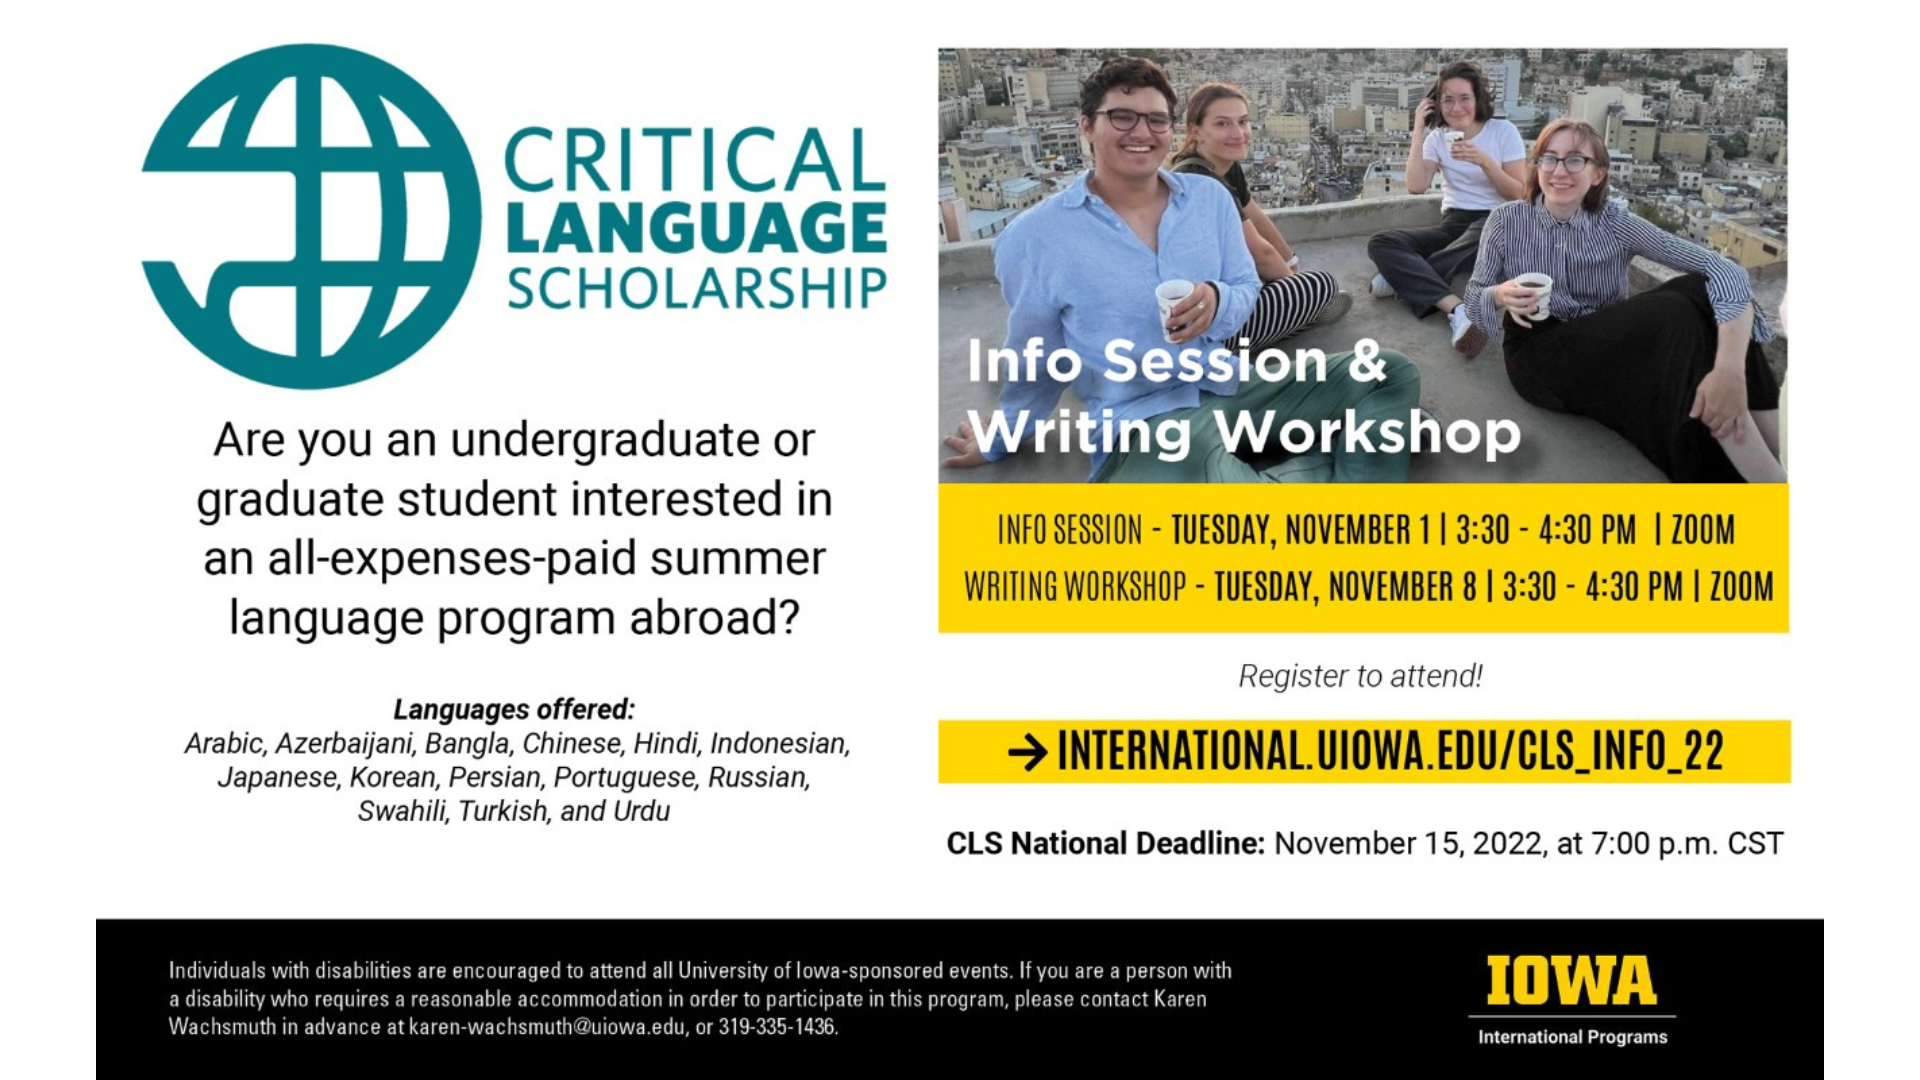 Critical Language Scholarship: Are you an undergraduate or graduate student interested in an all-expenses-paid summer language program abroad? Languages offered: Arabic, Azerbaijani, Bangla, Chinese, Hindi, Indonesian, Japanese, Korean, Persian, Portuguese, Russian, Swahili, Turkish, and Urdu. Info Session: Tuesday November 1 via Zoom from 3:30 PM to 4:30 PM. Writing Workshop: Tuesday November 8 via Zoom from 3:30 PM to 4:30 PM. Register to attend at international.uiowa.edu/cls_info_22